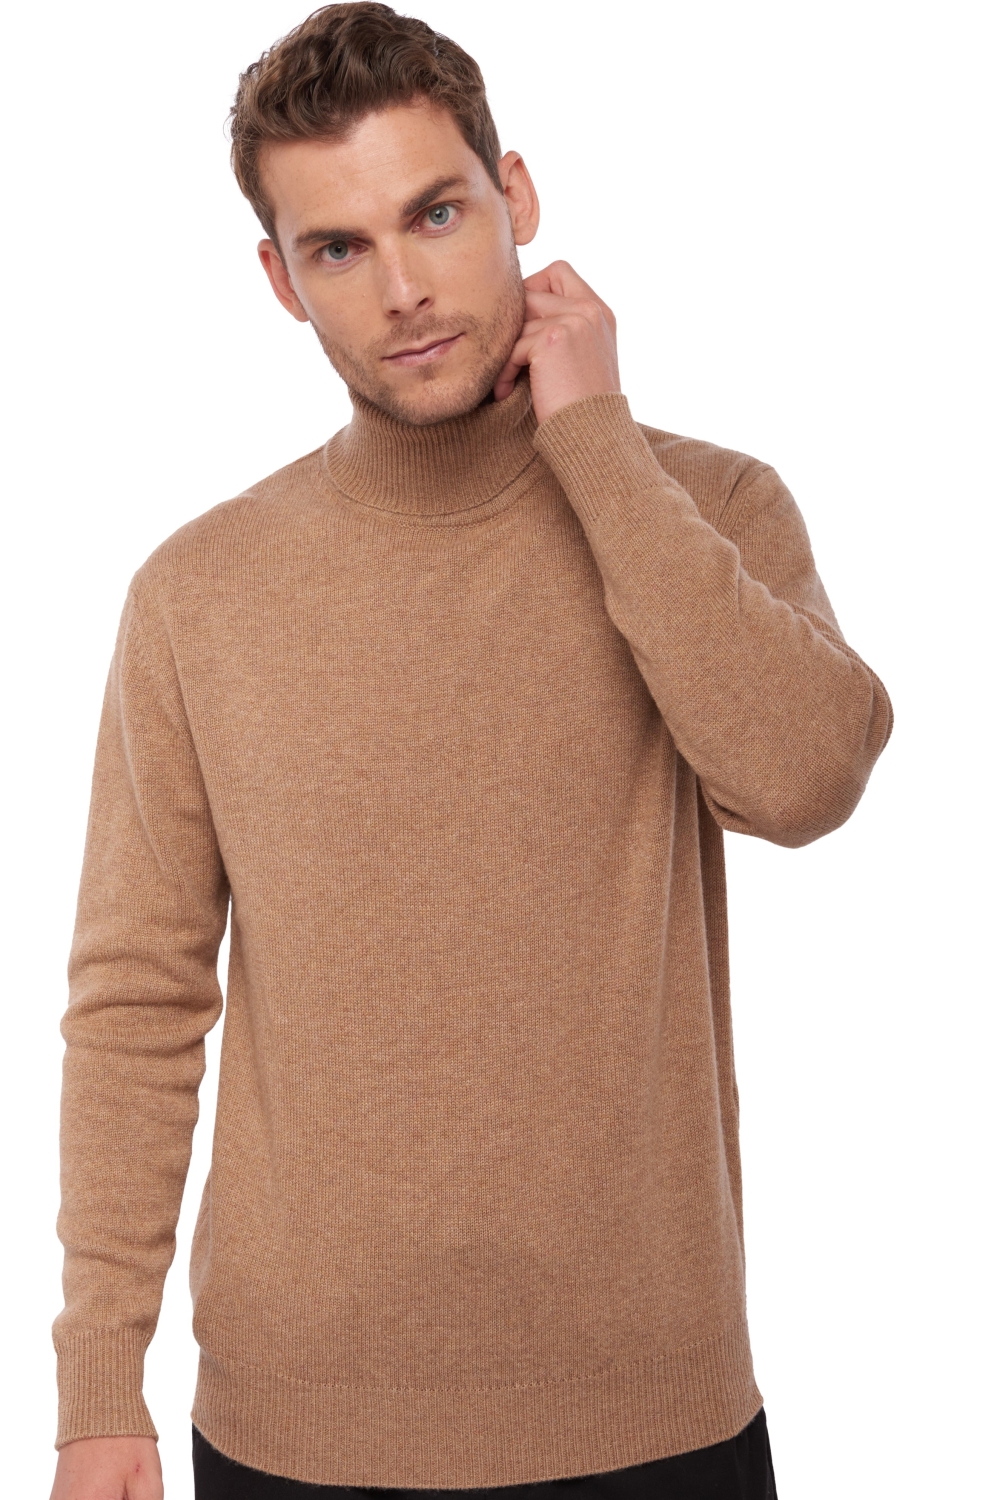 Cachemire pull homme col roule edgar 4f camel chine xl